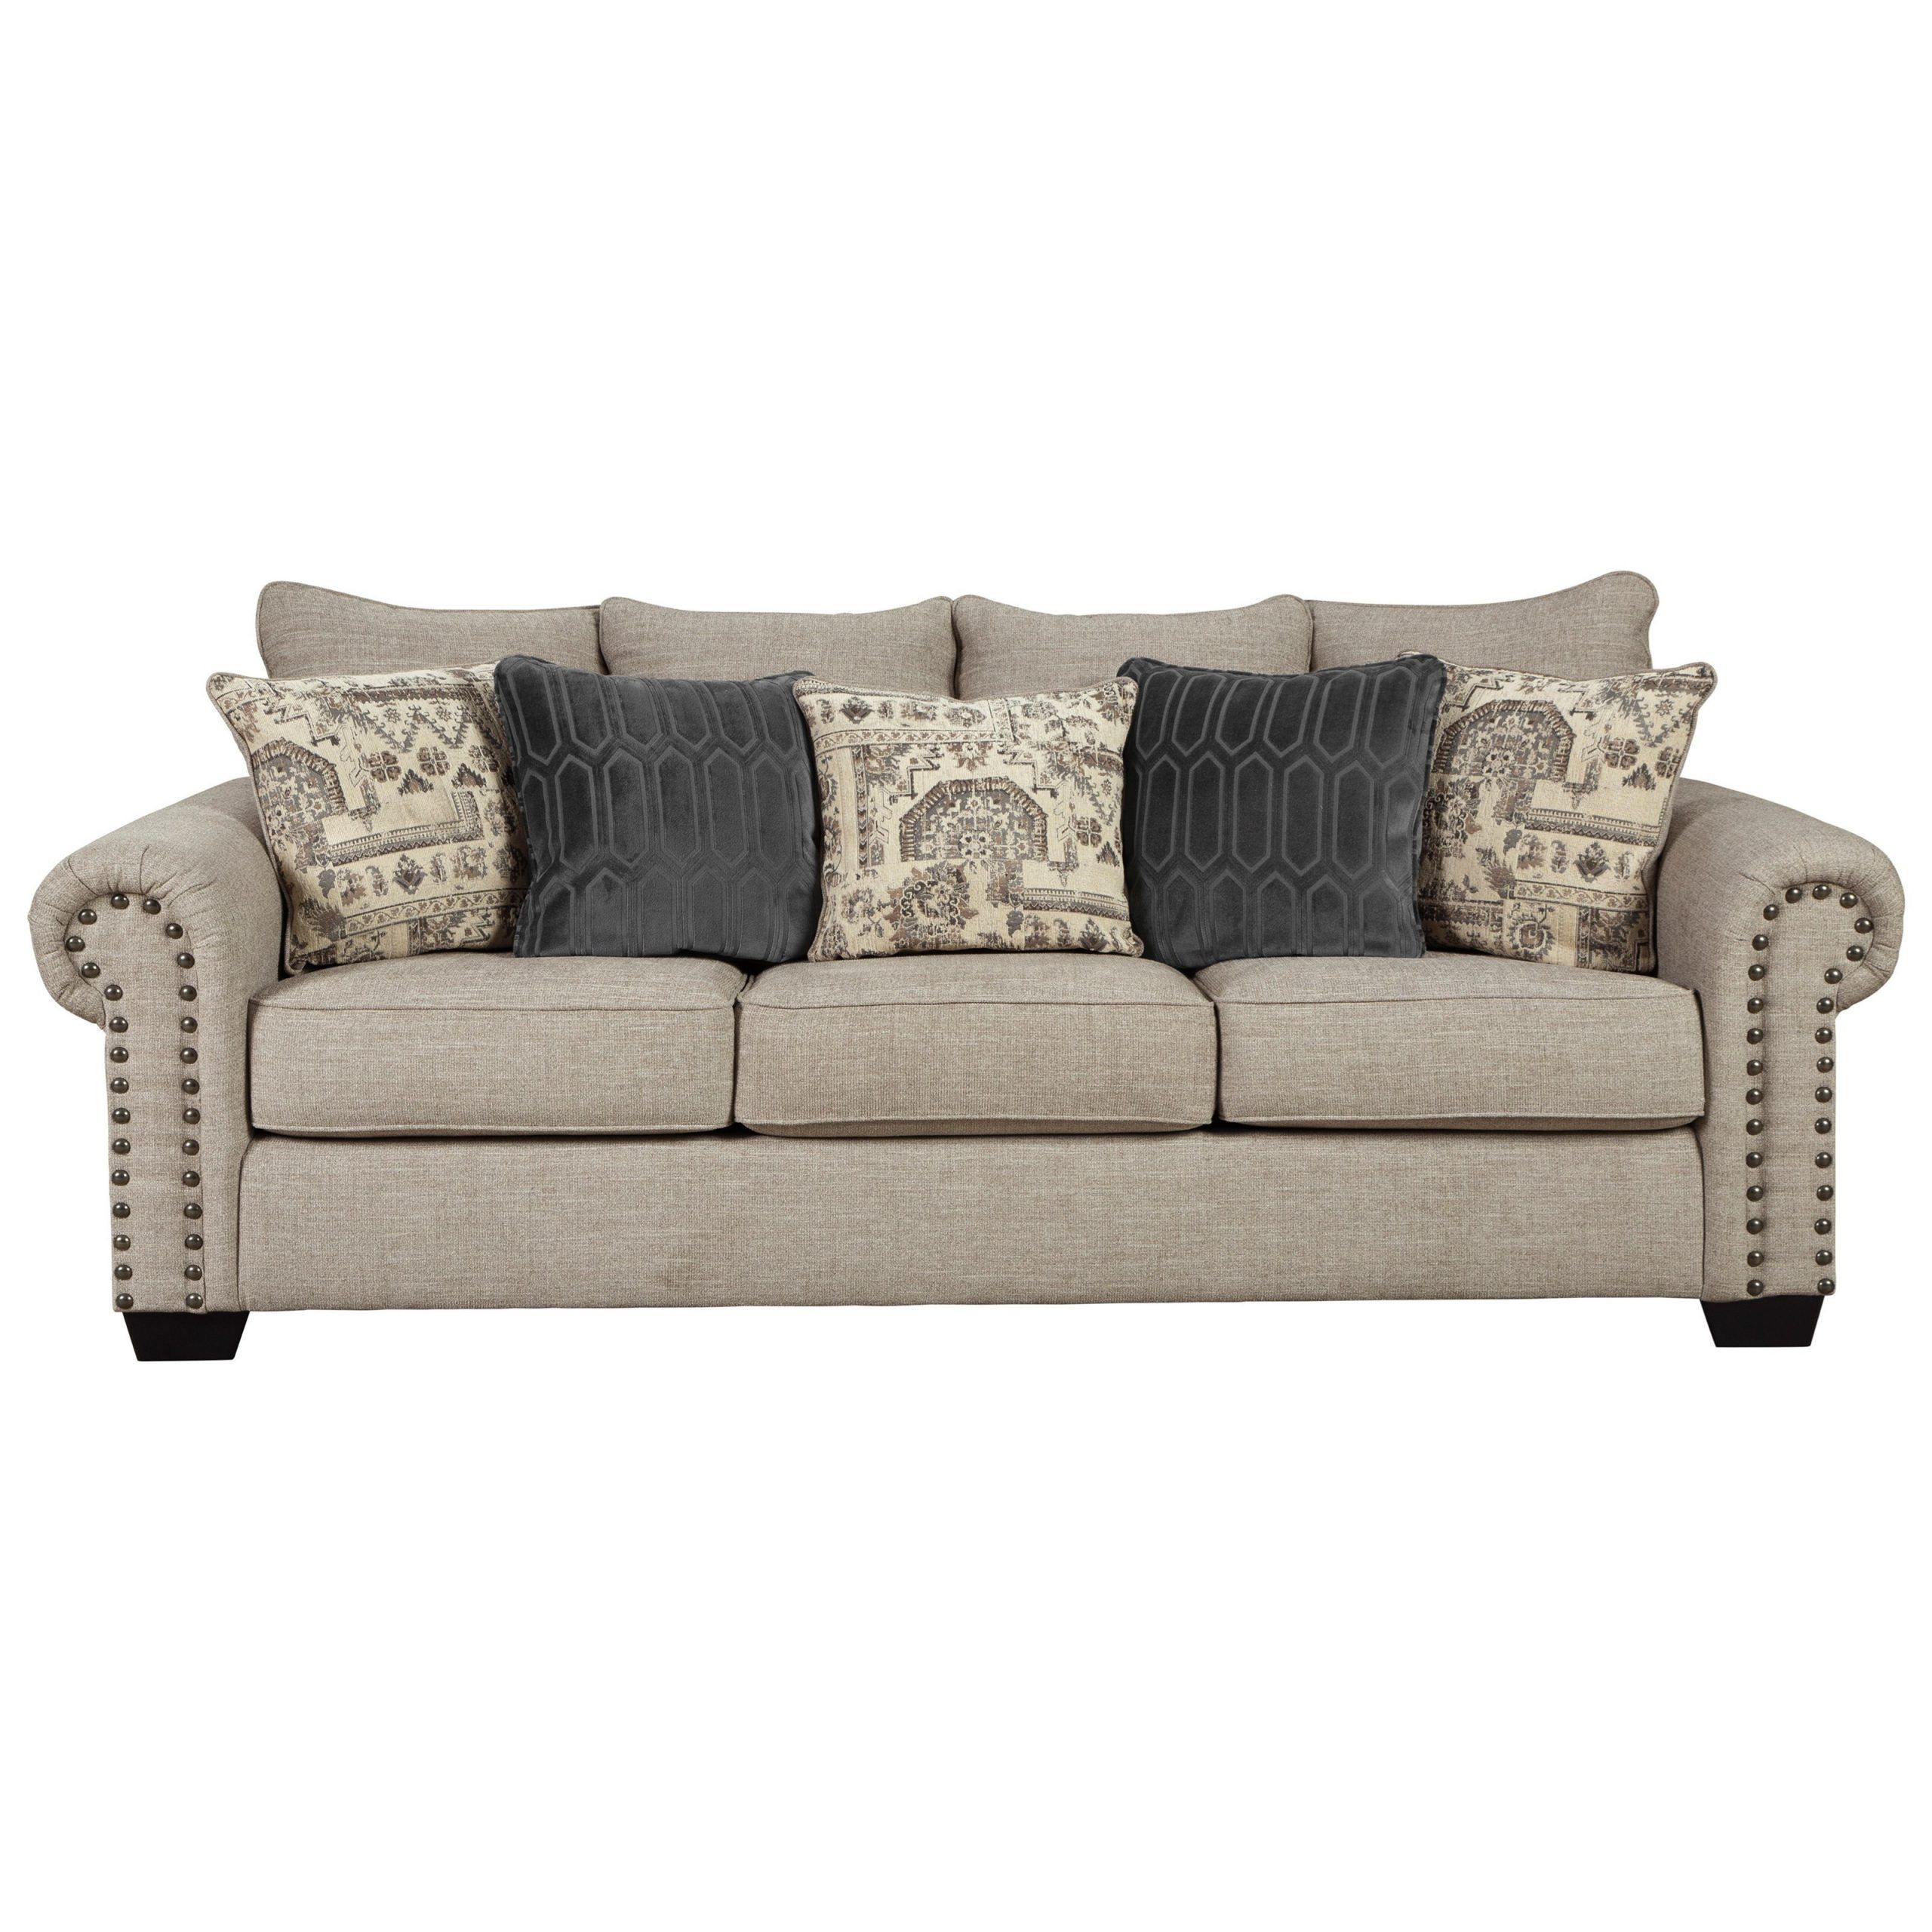 Signature Designashley Zarina 9770438 Transitional In 2pc Polyfiber Sectional Sofas With Nailhead Trims Gray (View 4 of 15)